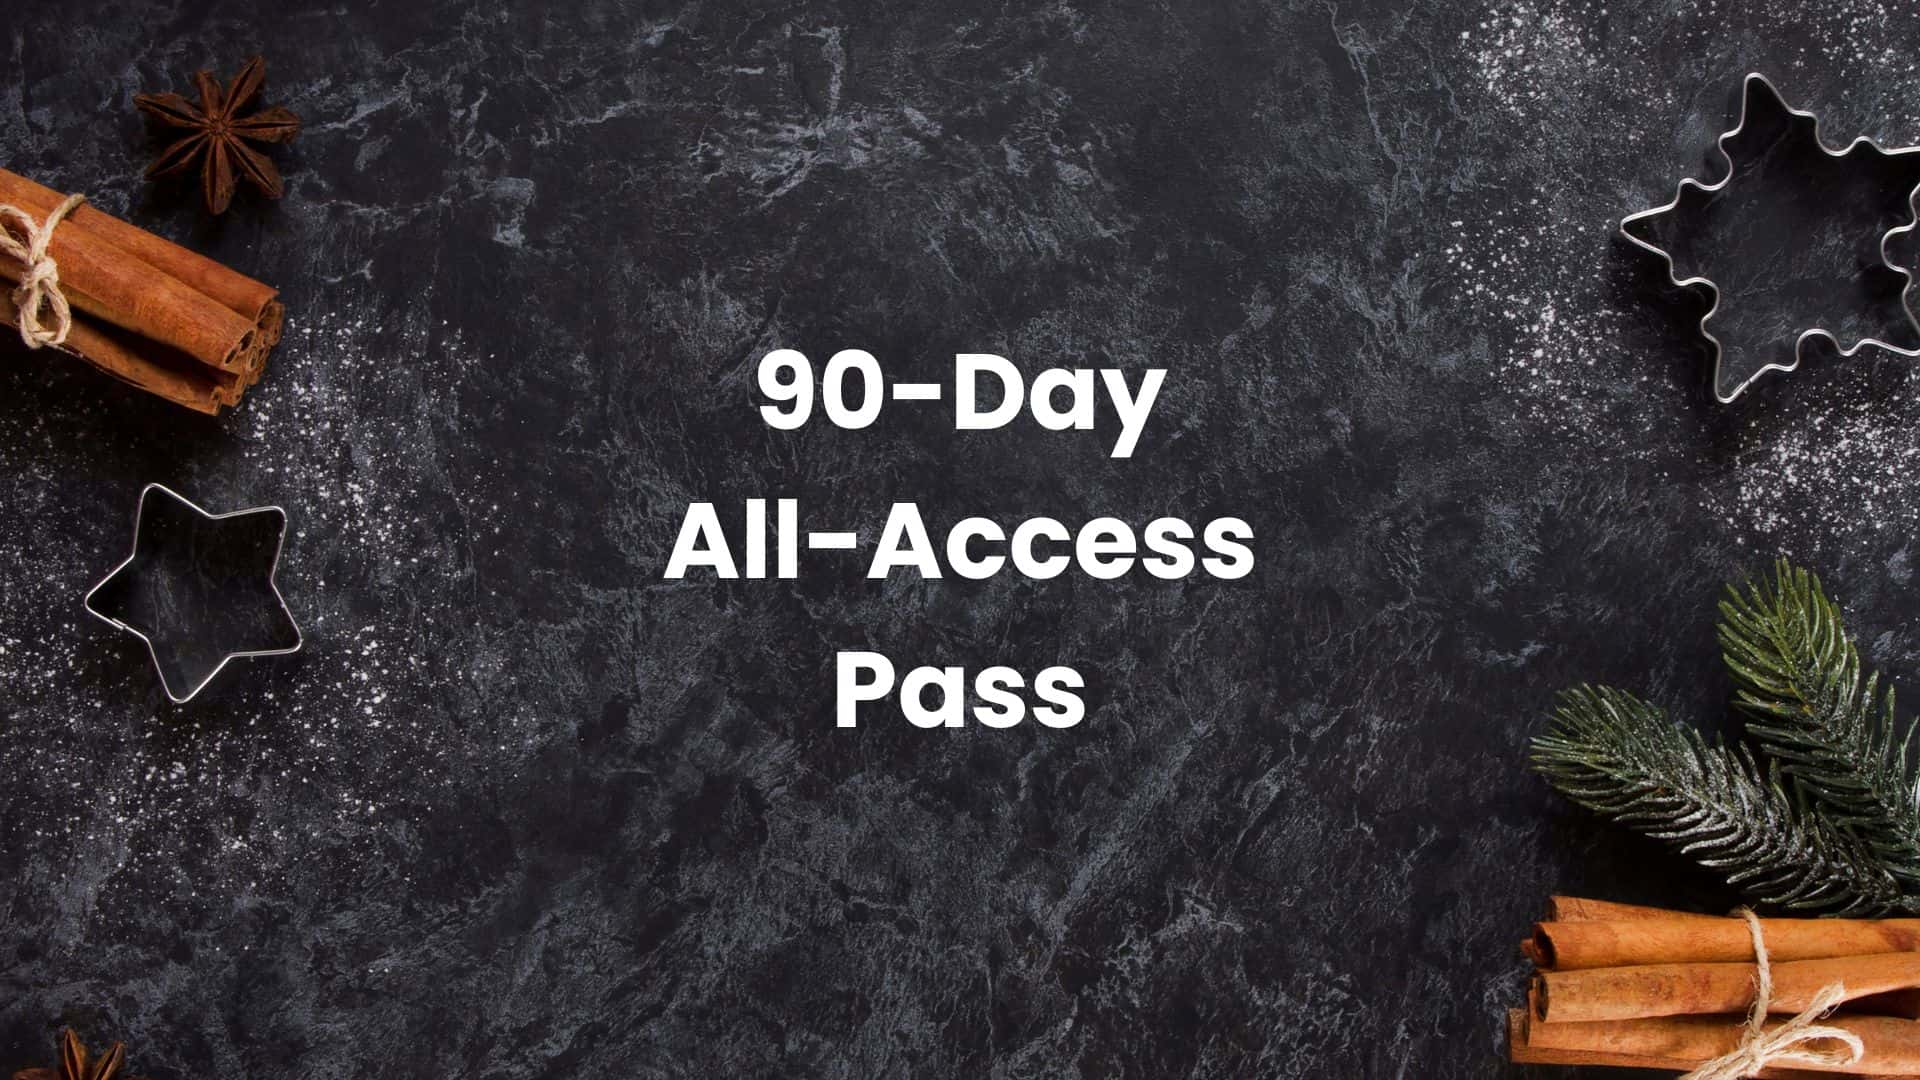 90-Day All-Access Pass (Facebook Event Cover)